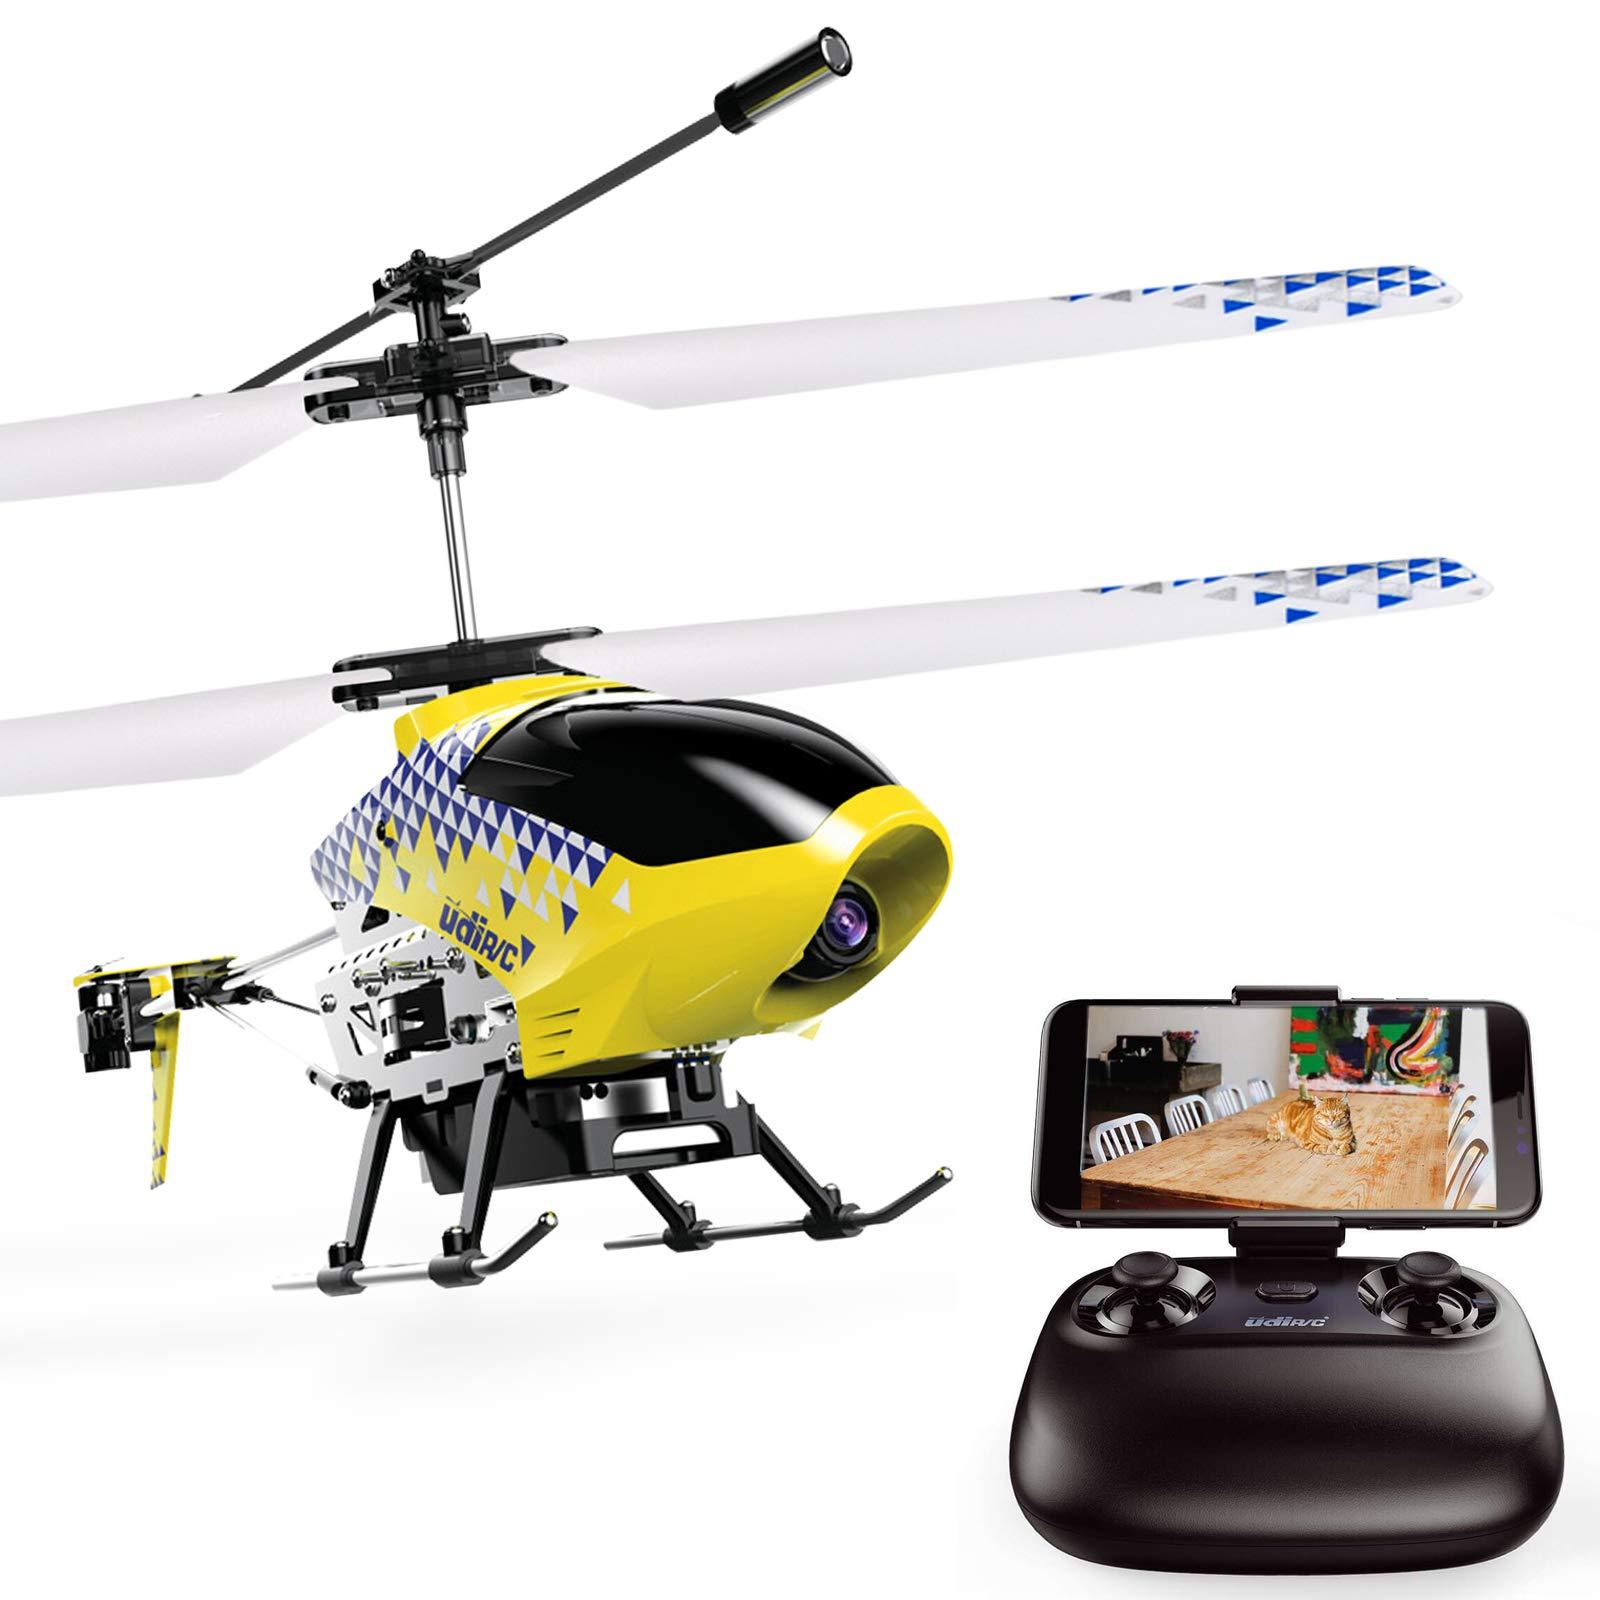 Remote Control Flying Helicopter Price: Price Range for Basic Remote Control Flying Helicopters